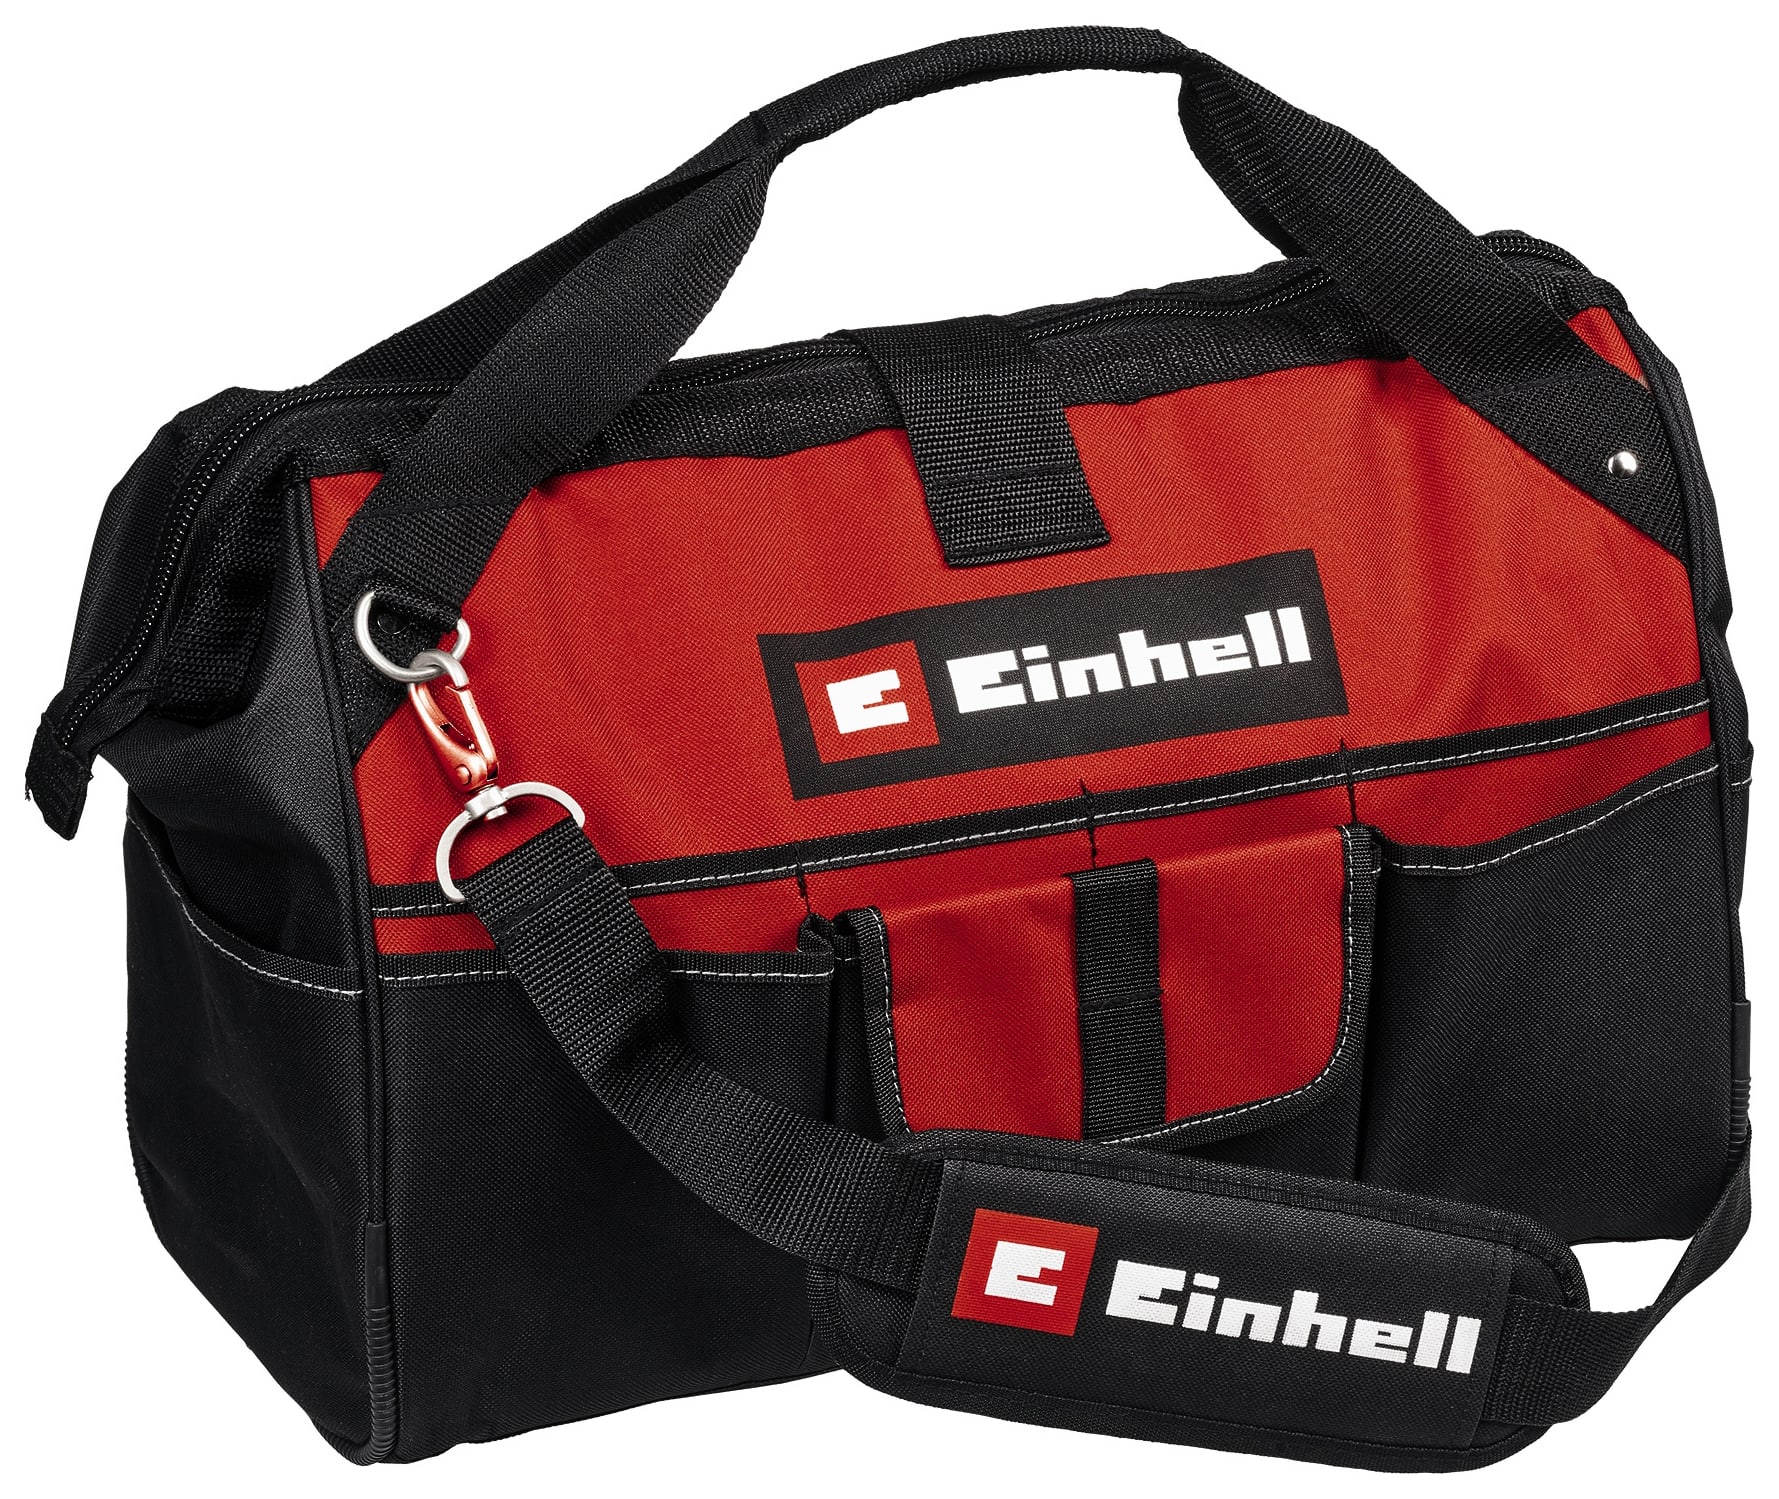 Einhell Bag 45/29 Carry Case Toolbag - 450mm